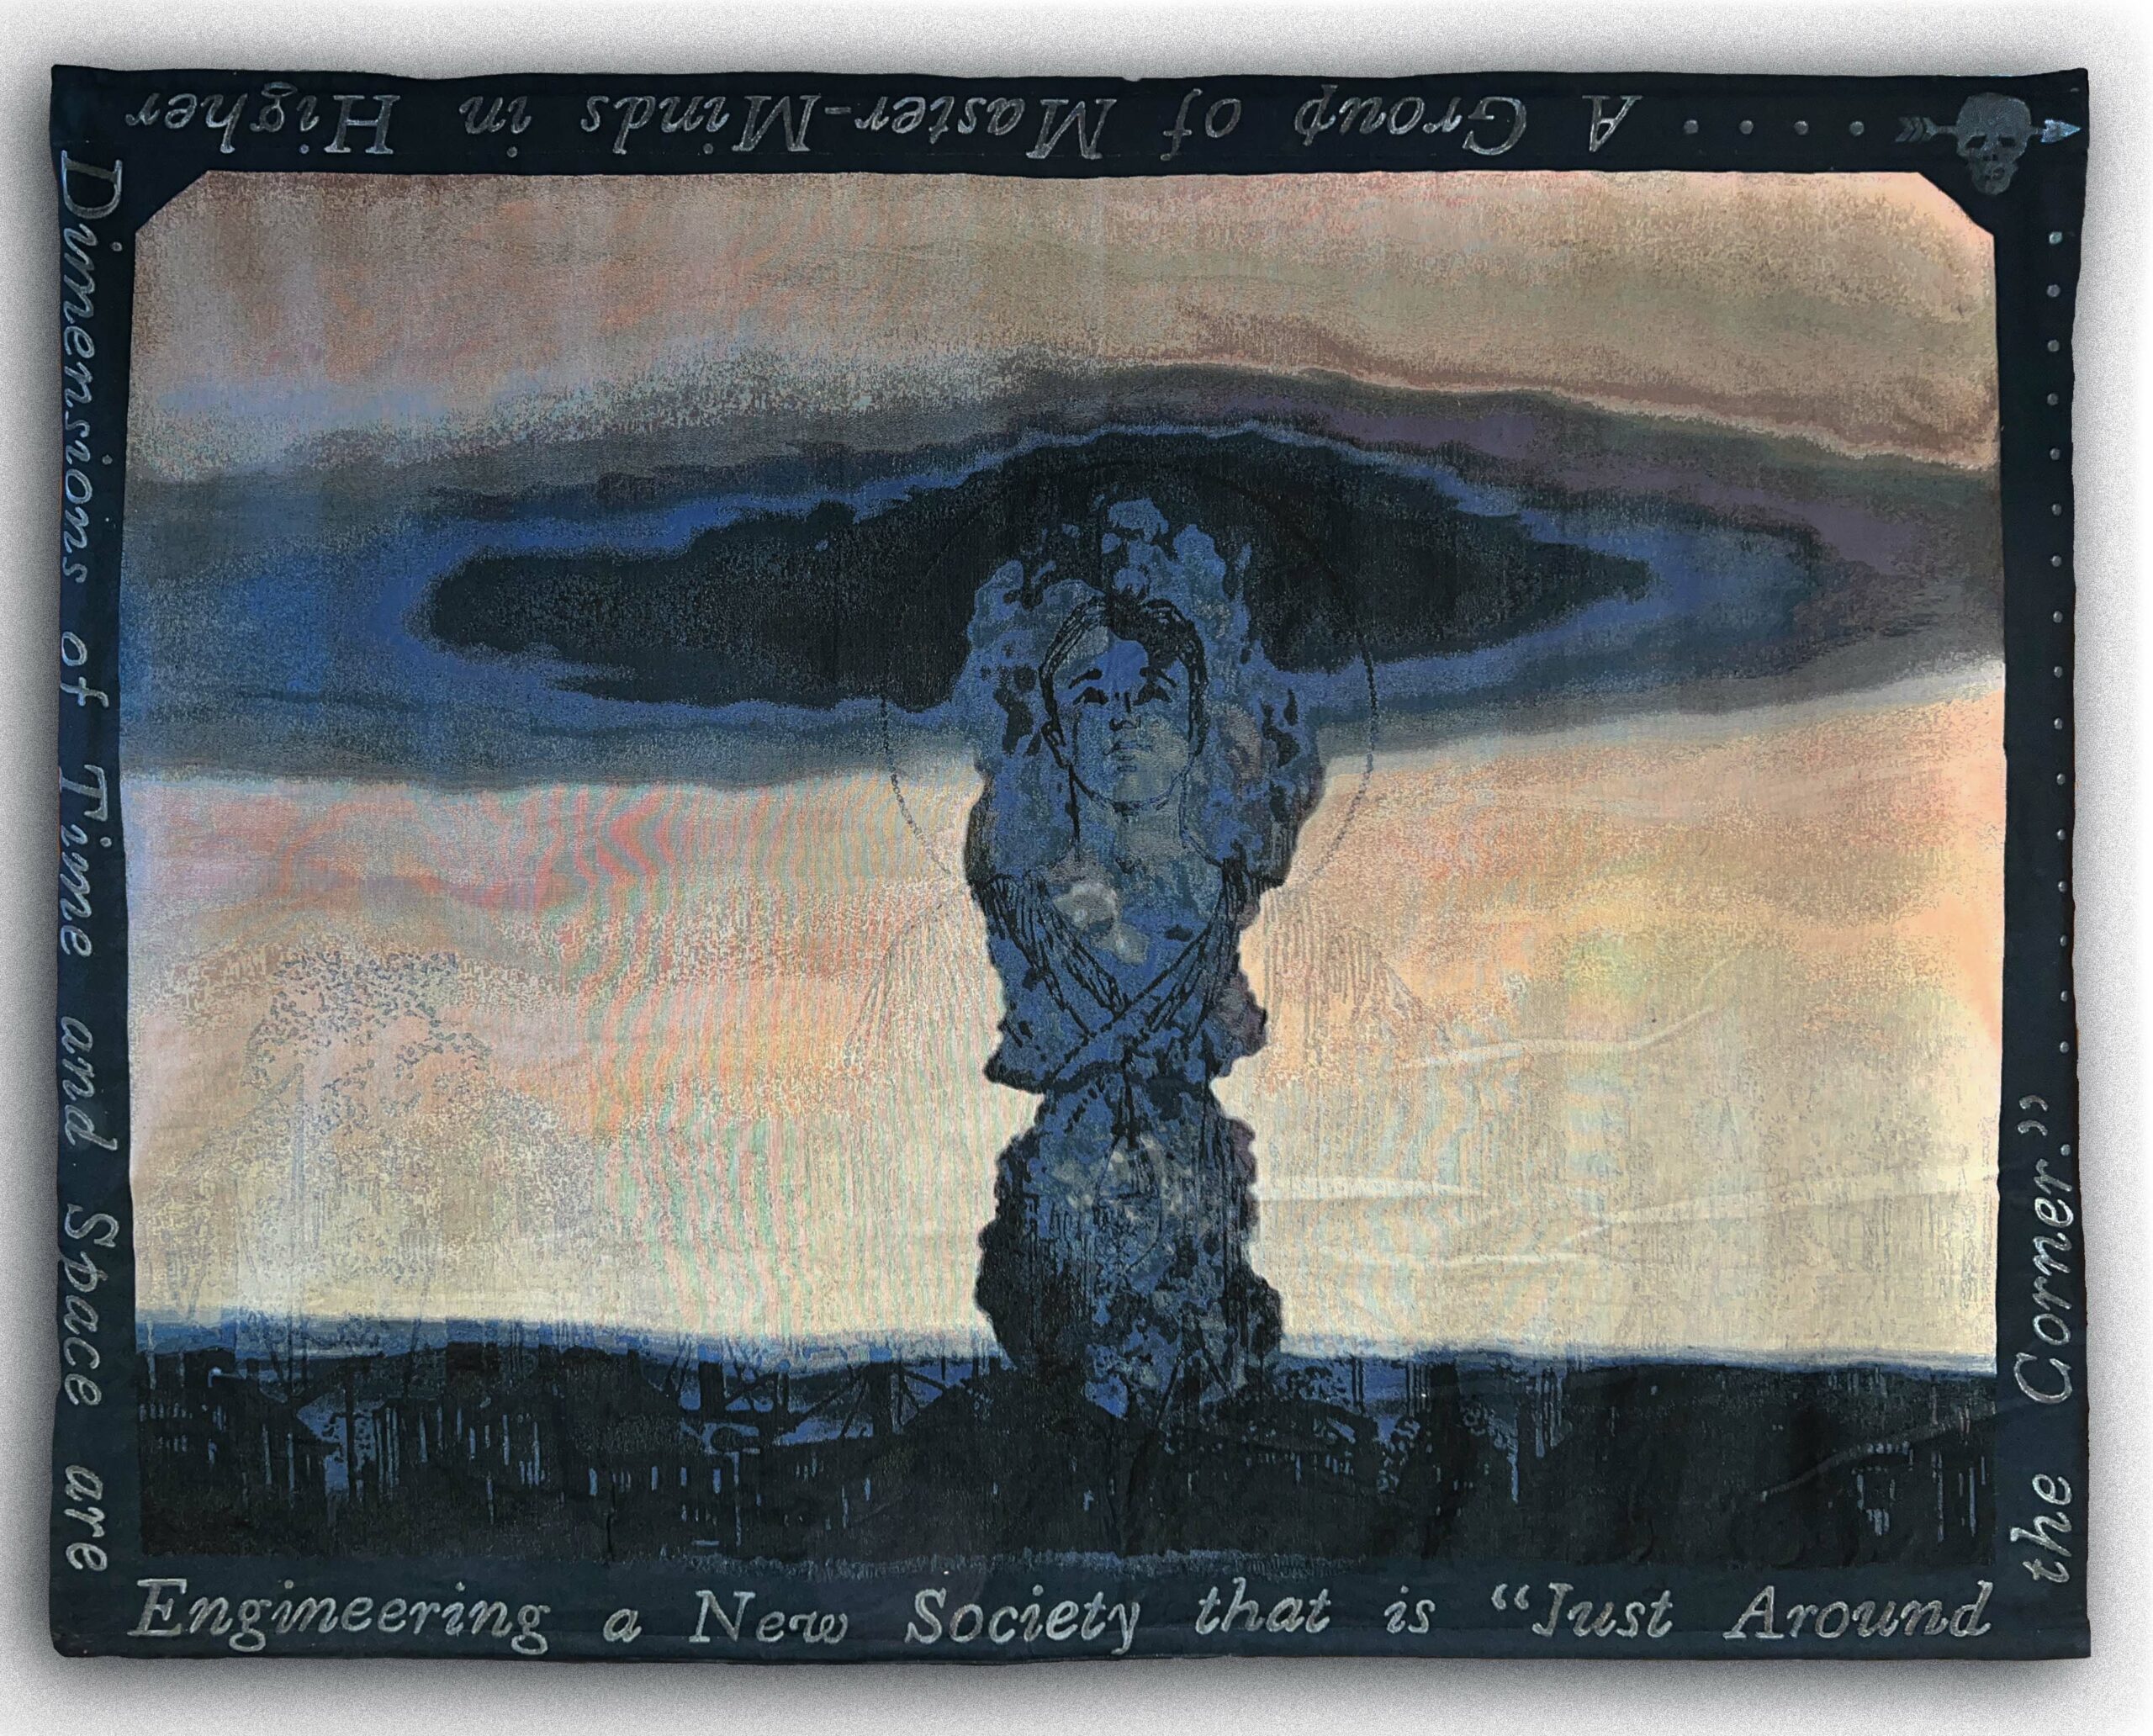 Tapestry with dark blue mushroom cloud with face inside it.